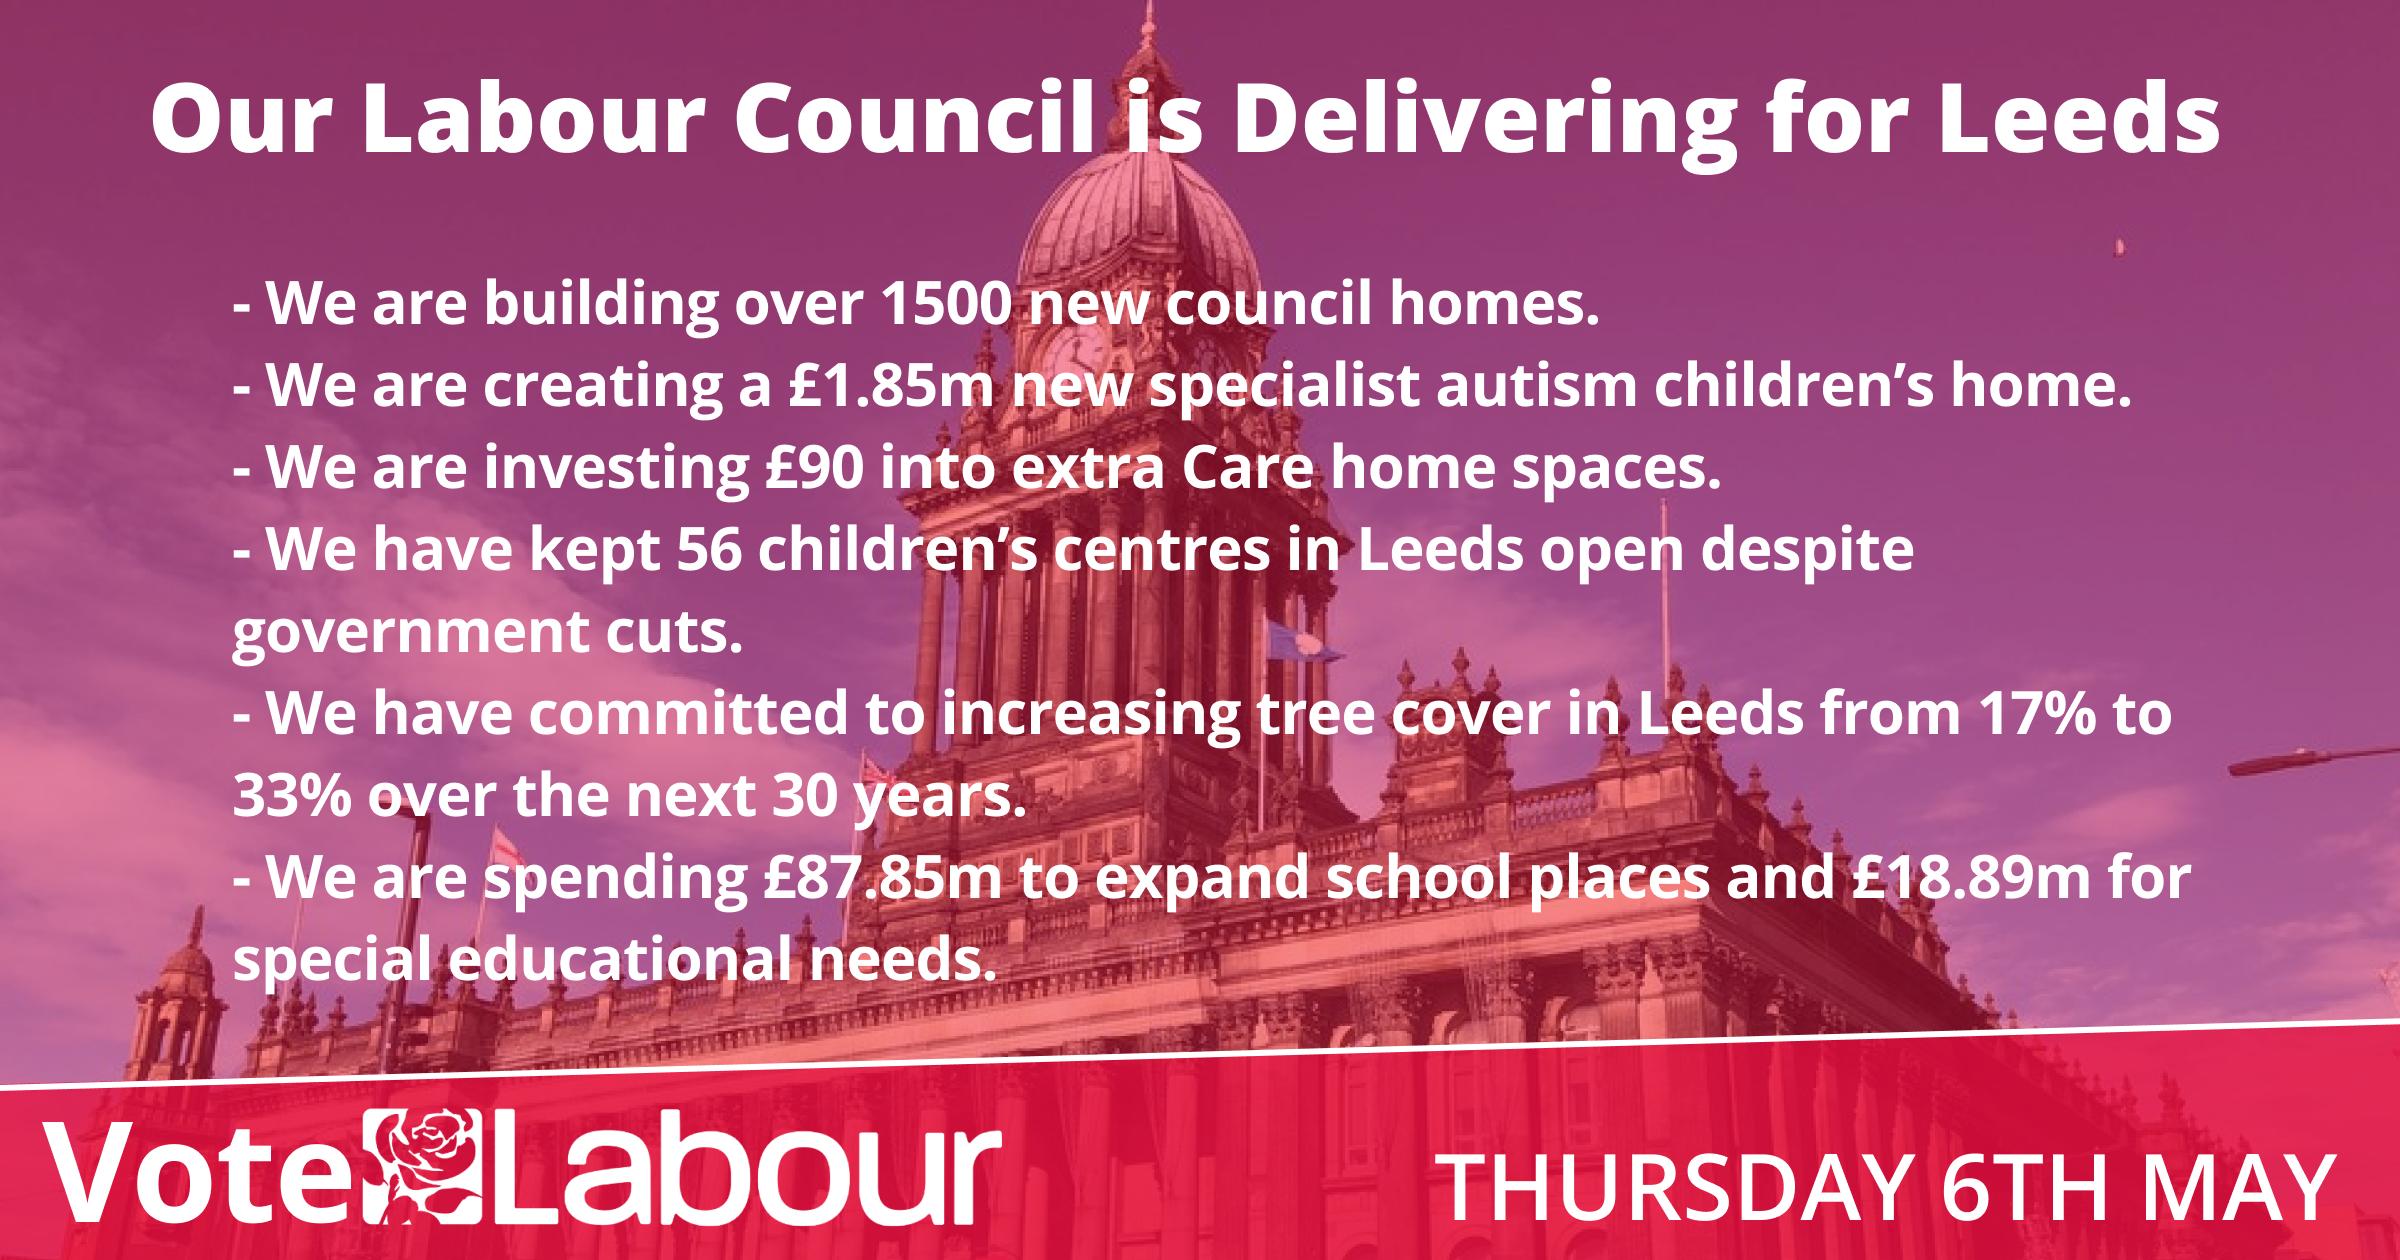 Our Labour Council is delivering for Leeds